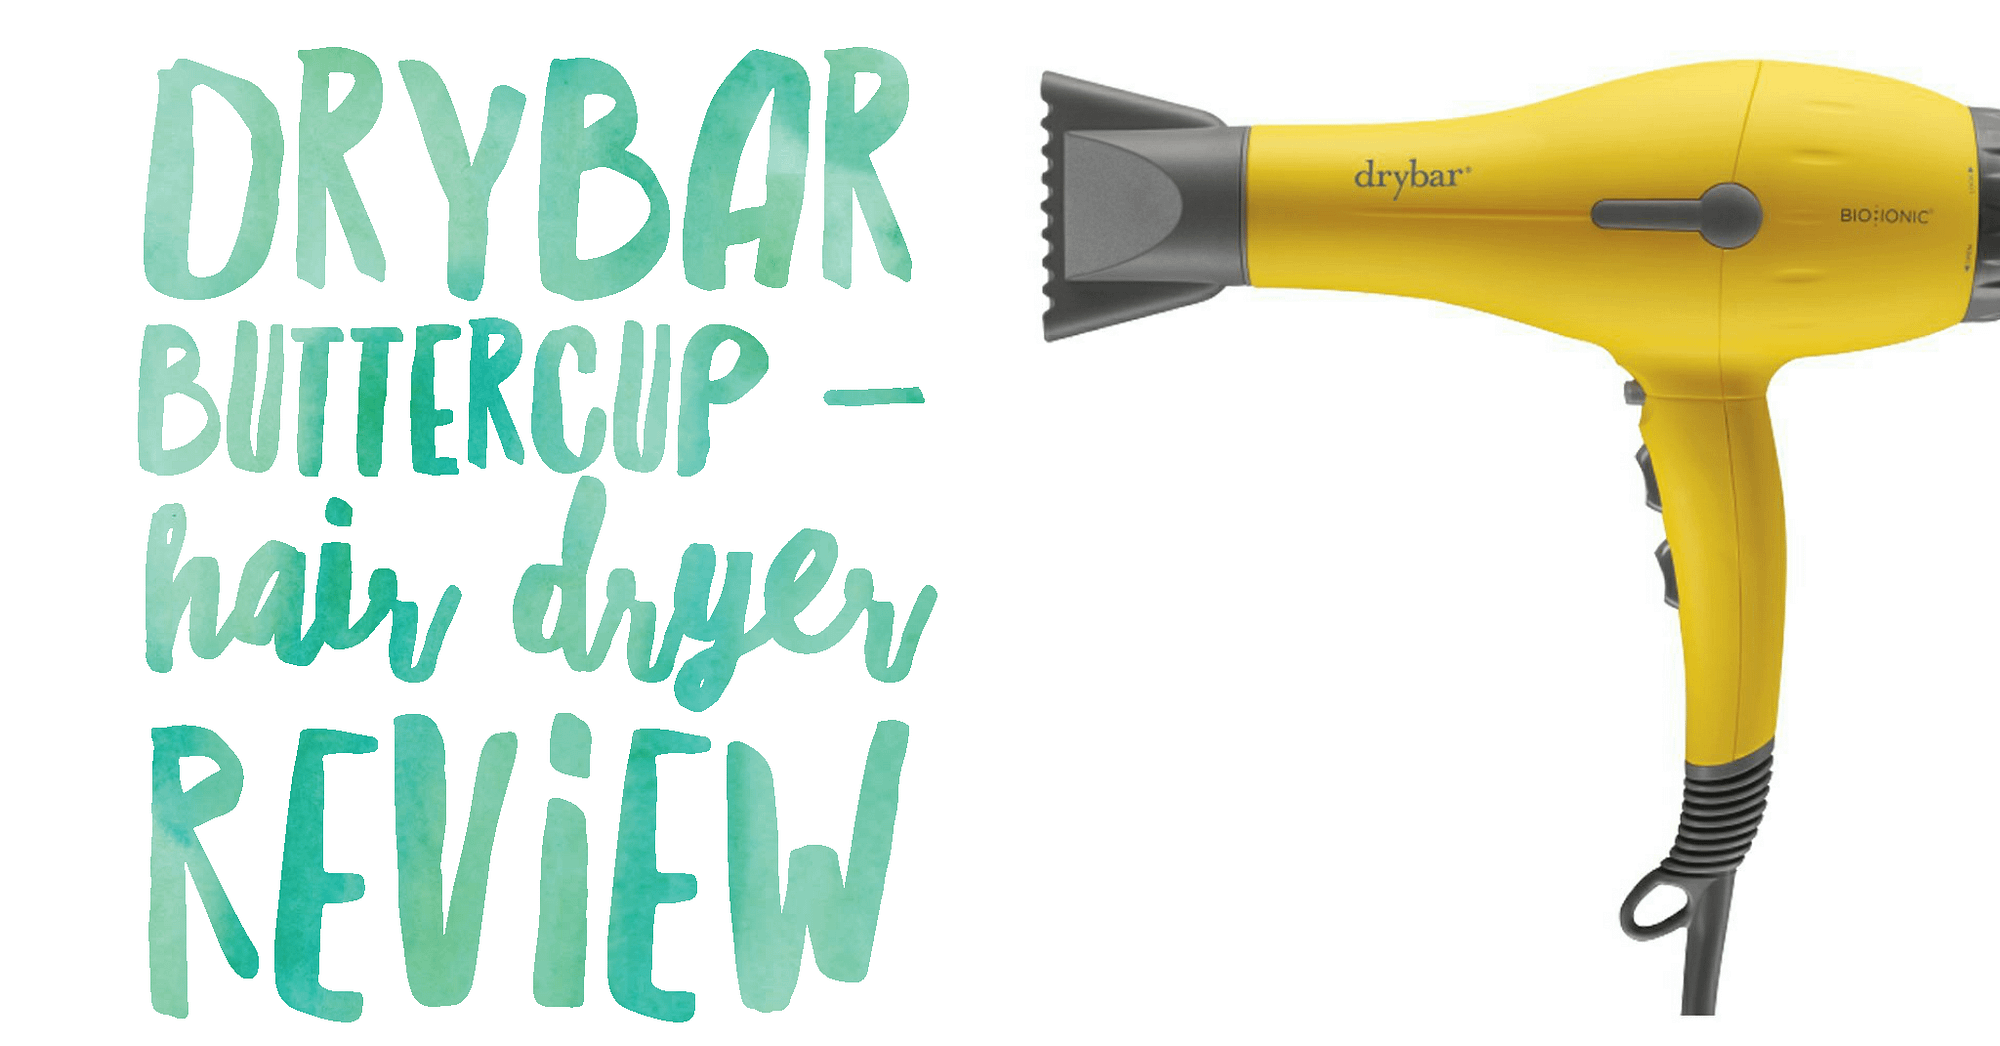 drybar buttercup only blowing cold